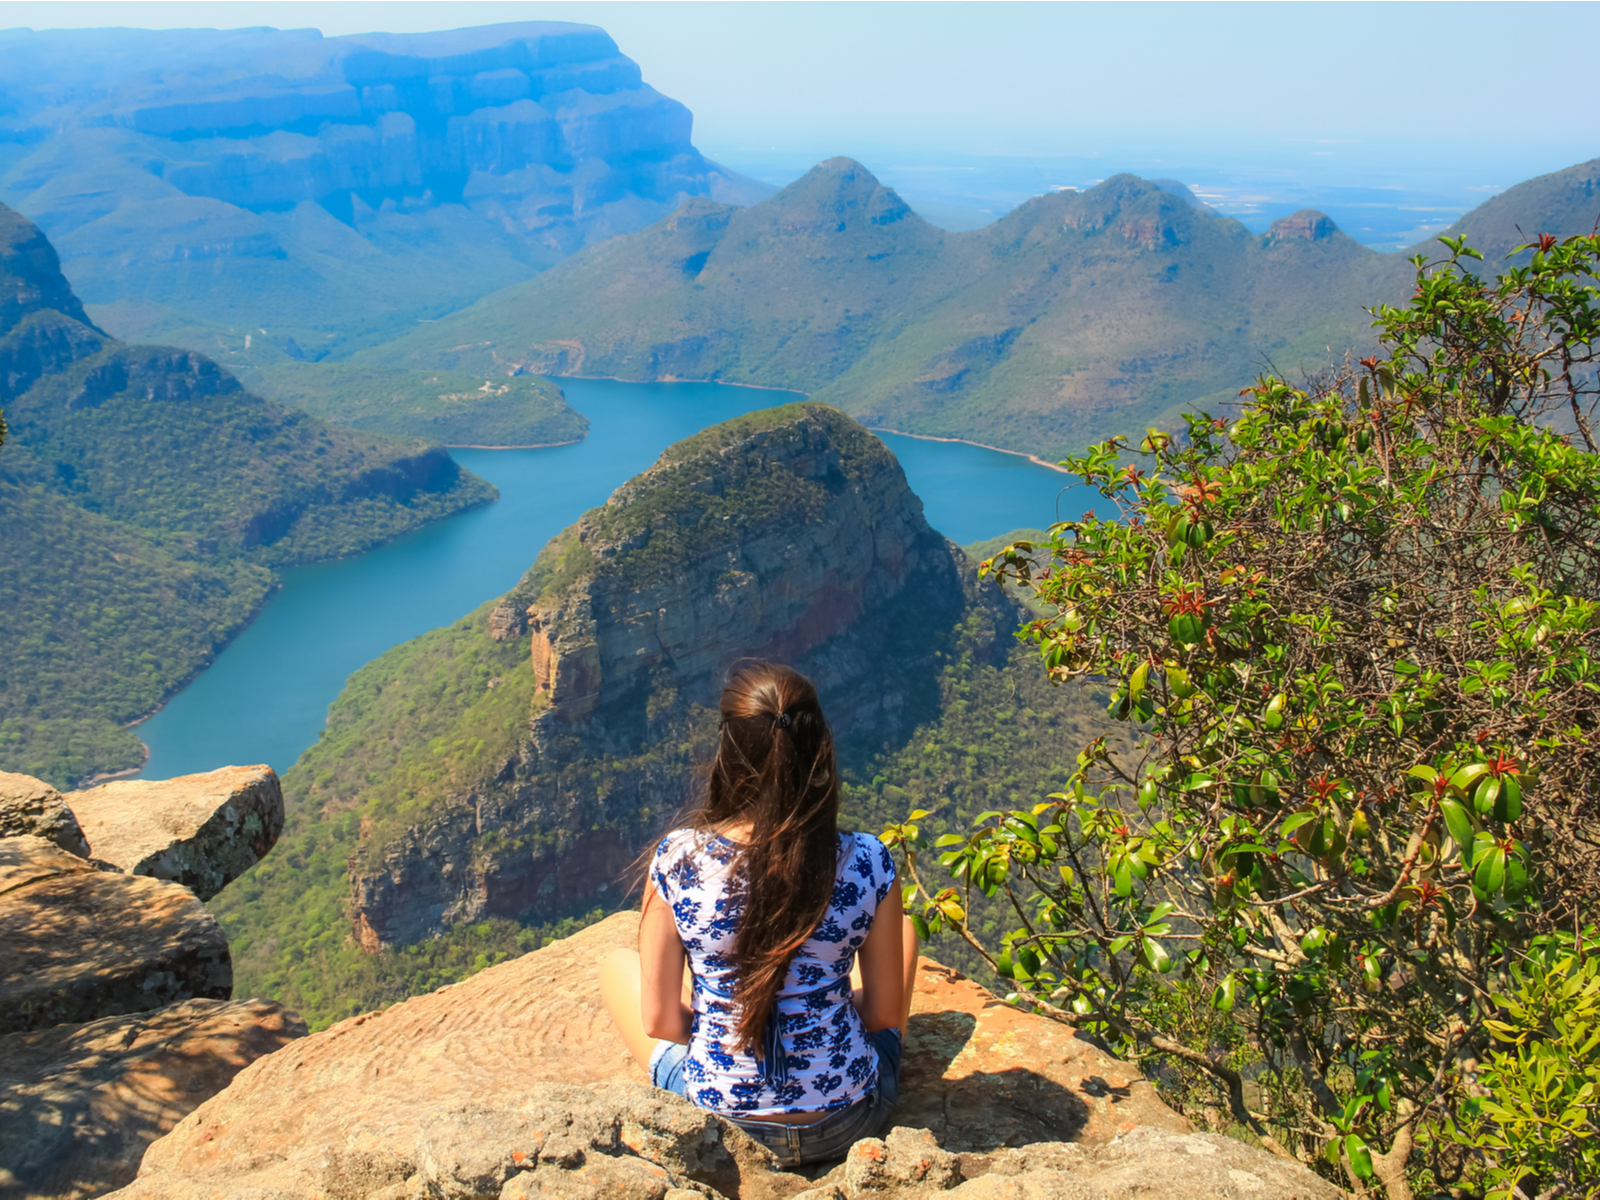 For a piece titled Is South Africa Safe to Visit, a woman sitting on the side of a rock face